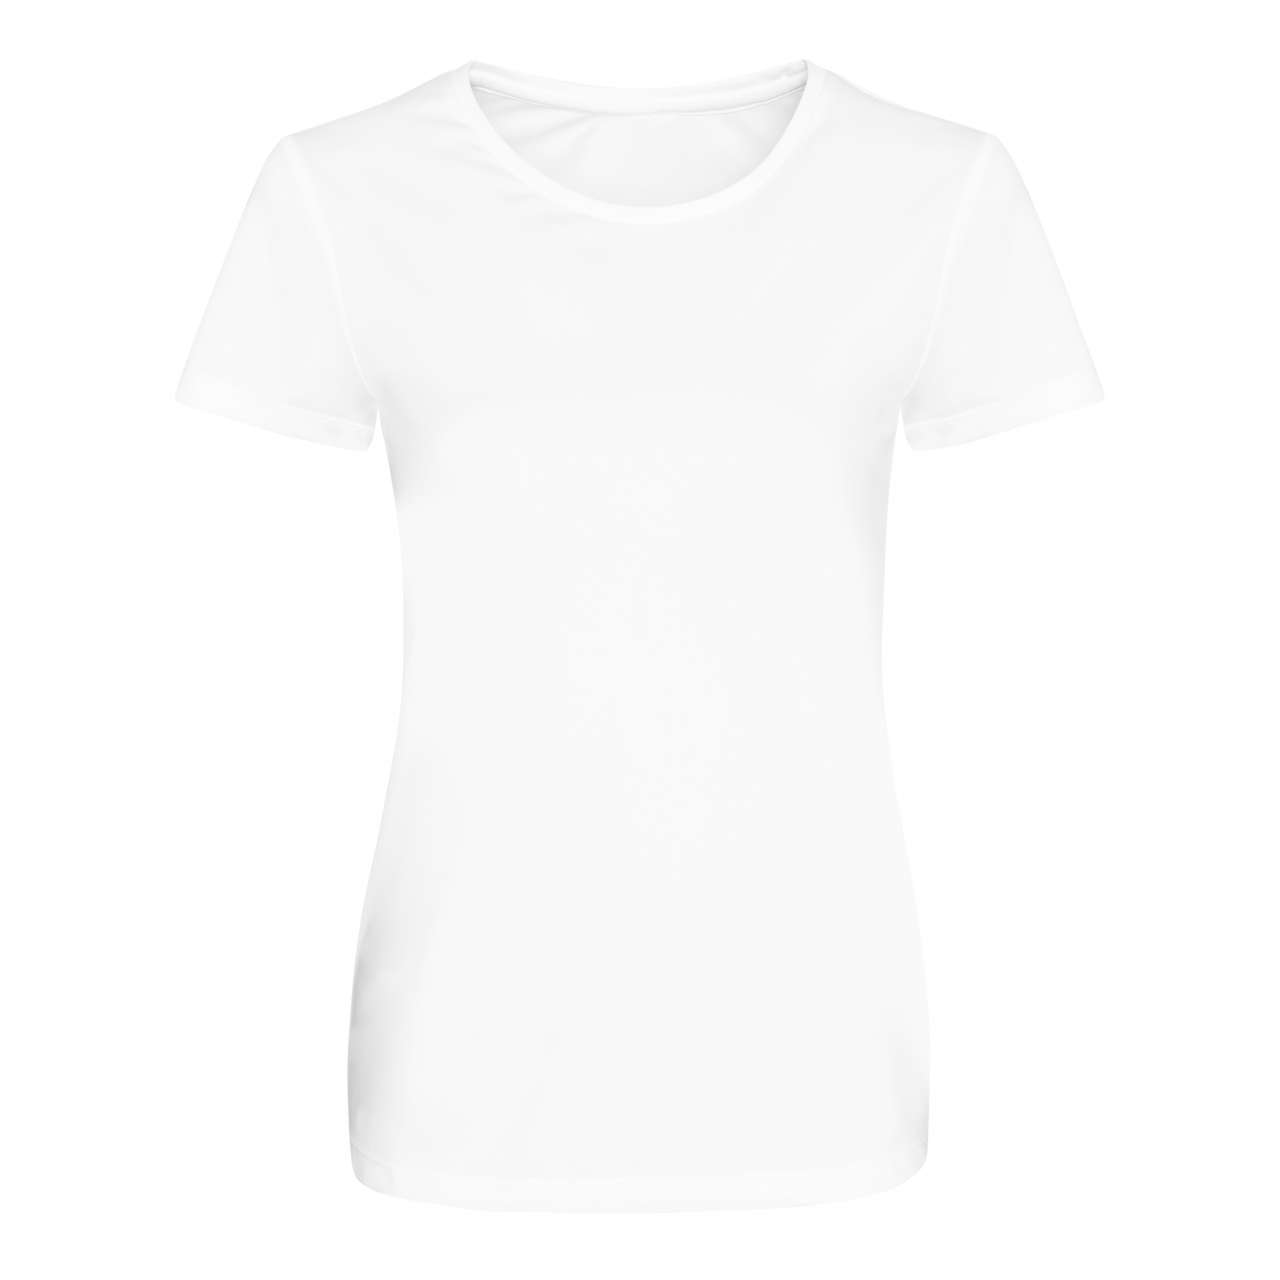 Promo  WOMEN'S COOL SMOOTH T